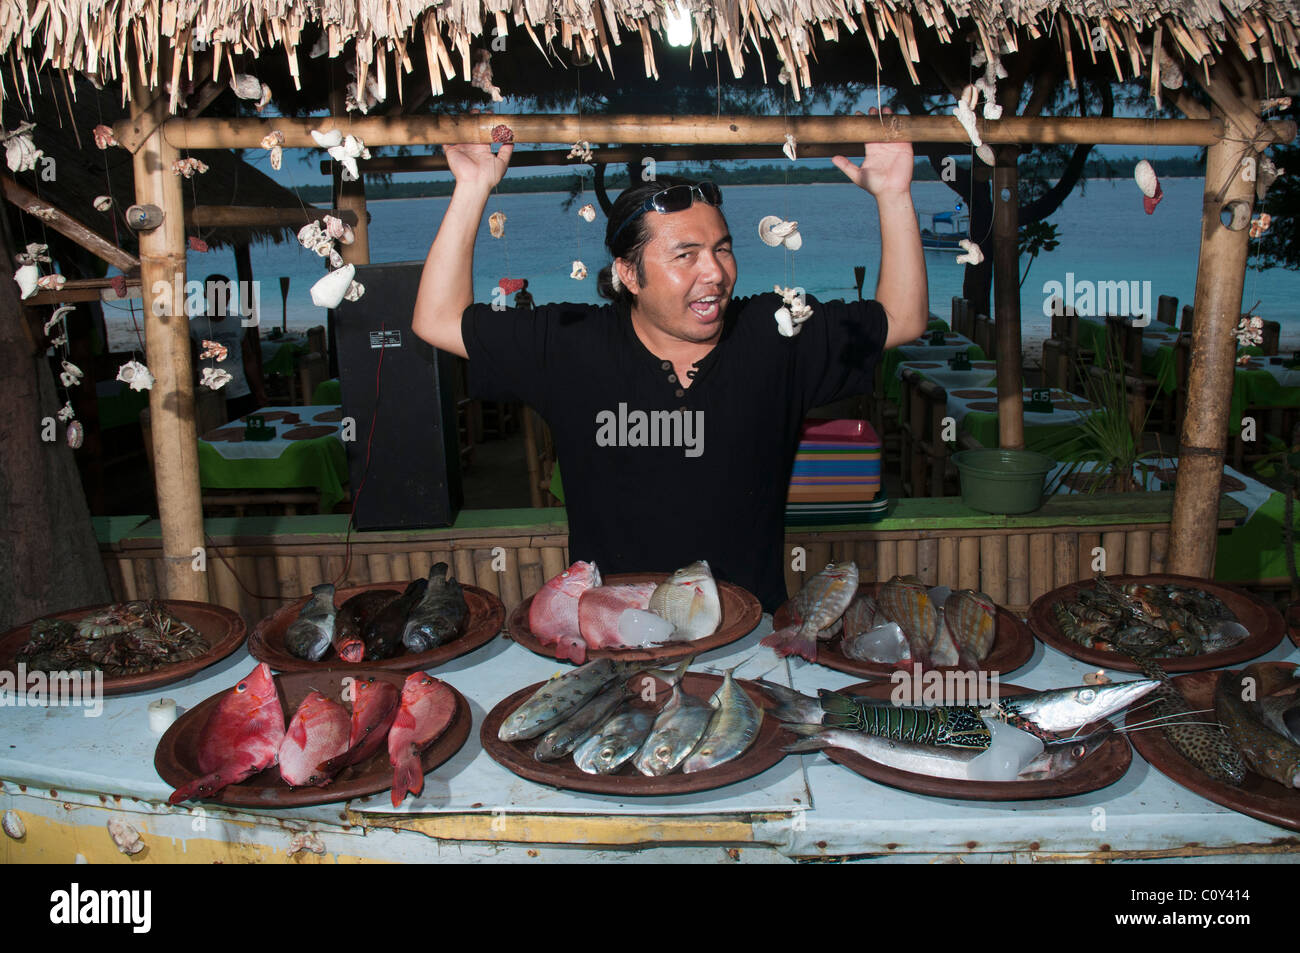 An extroverted restaurateur displays his wares at a seafood restaurant on the island of Gili Trawangan near Lombok Indonesia Stock Photo